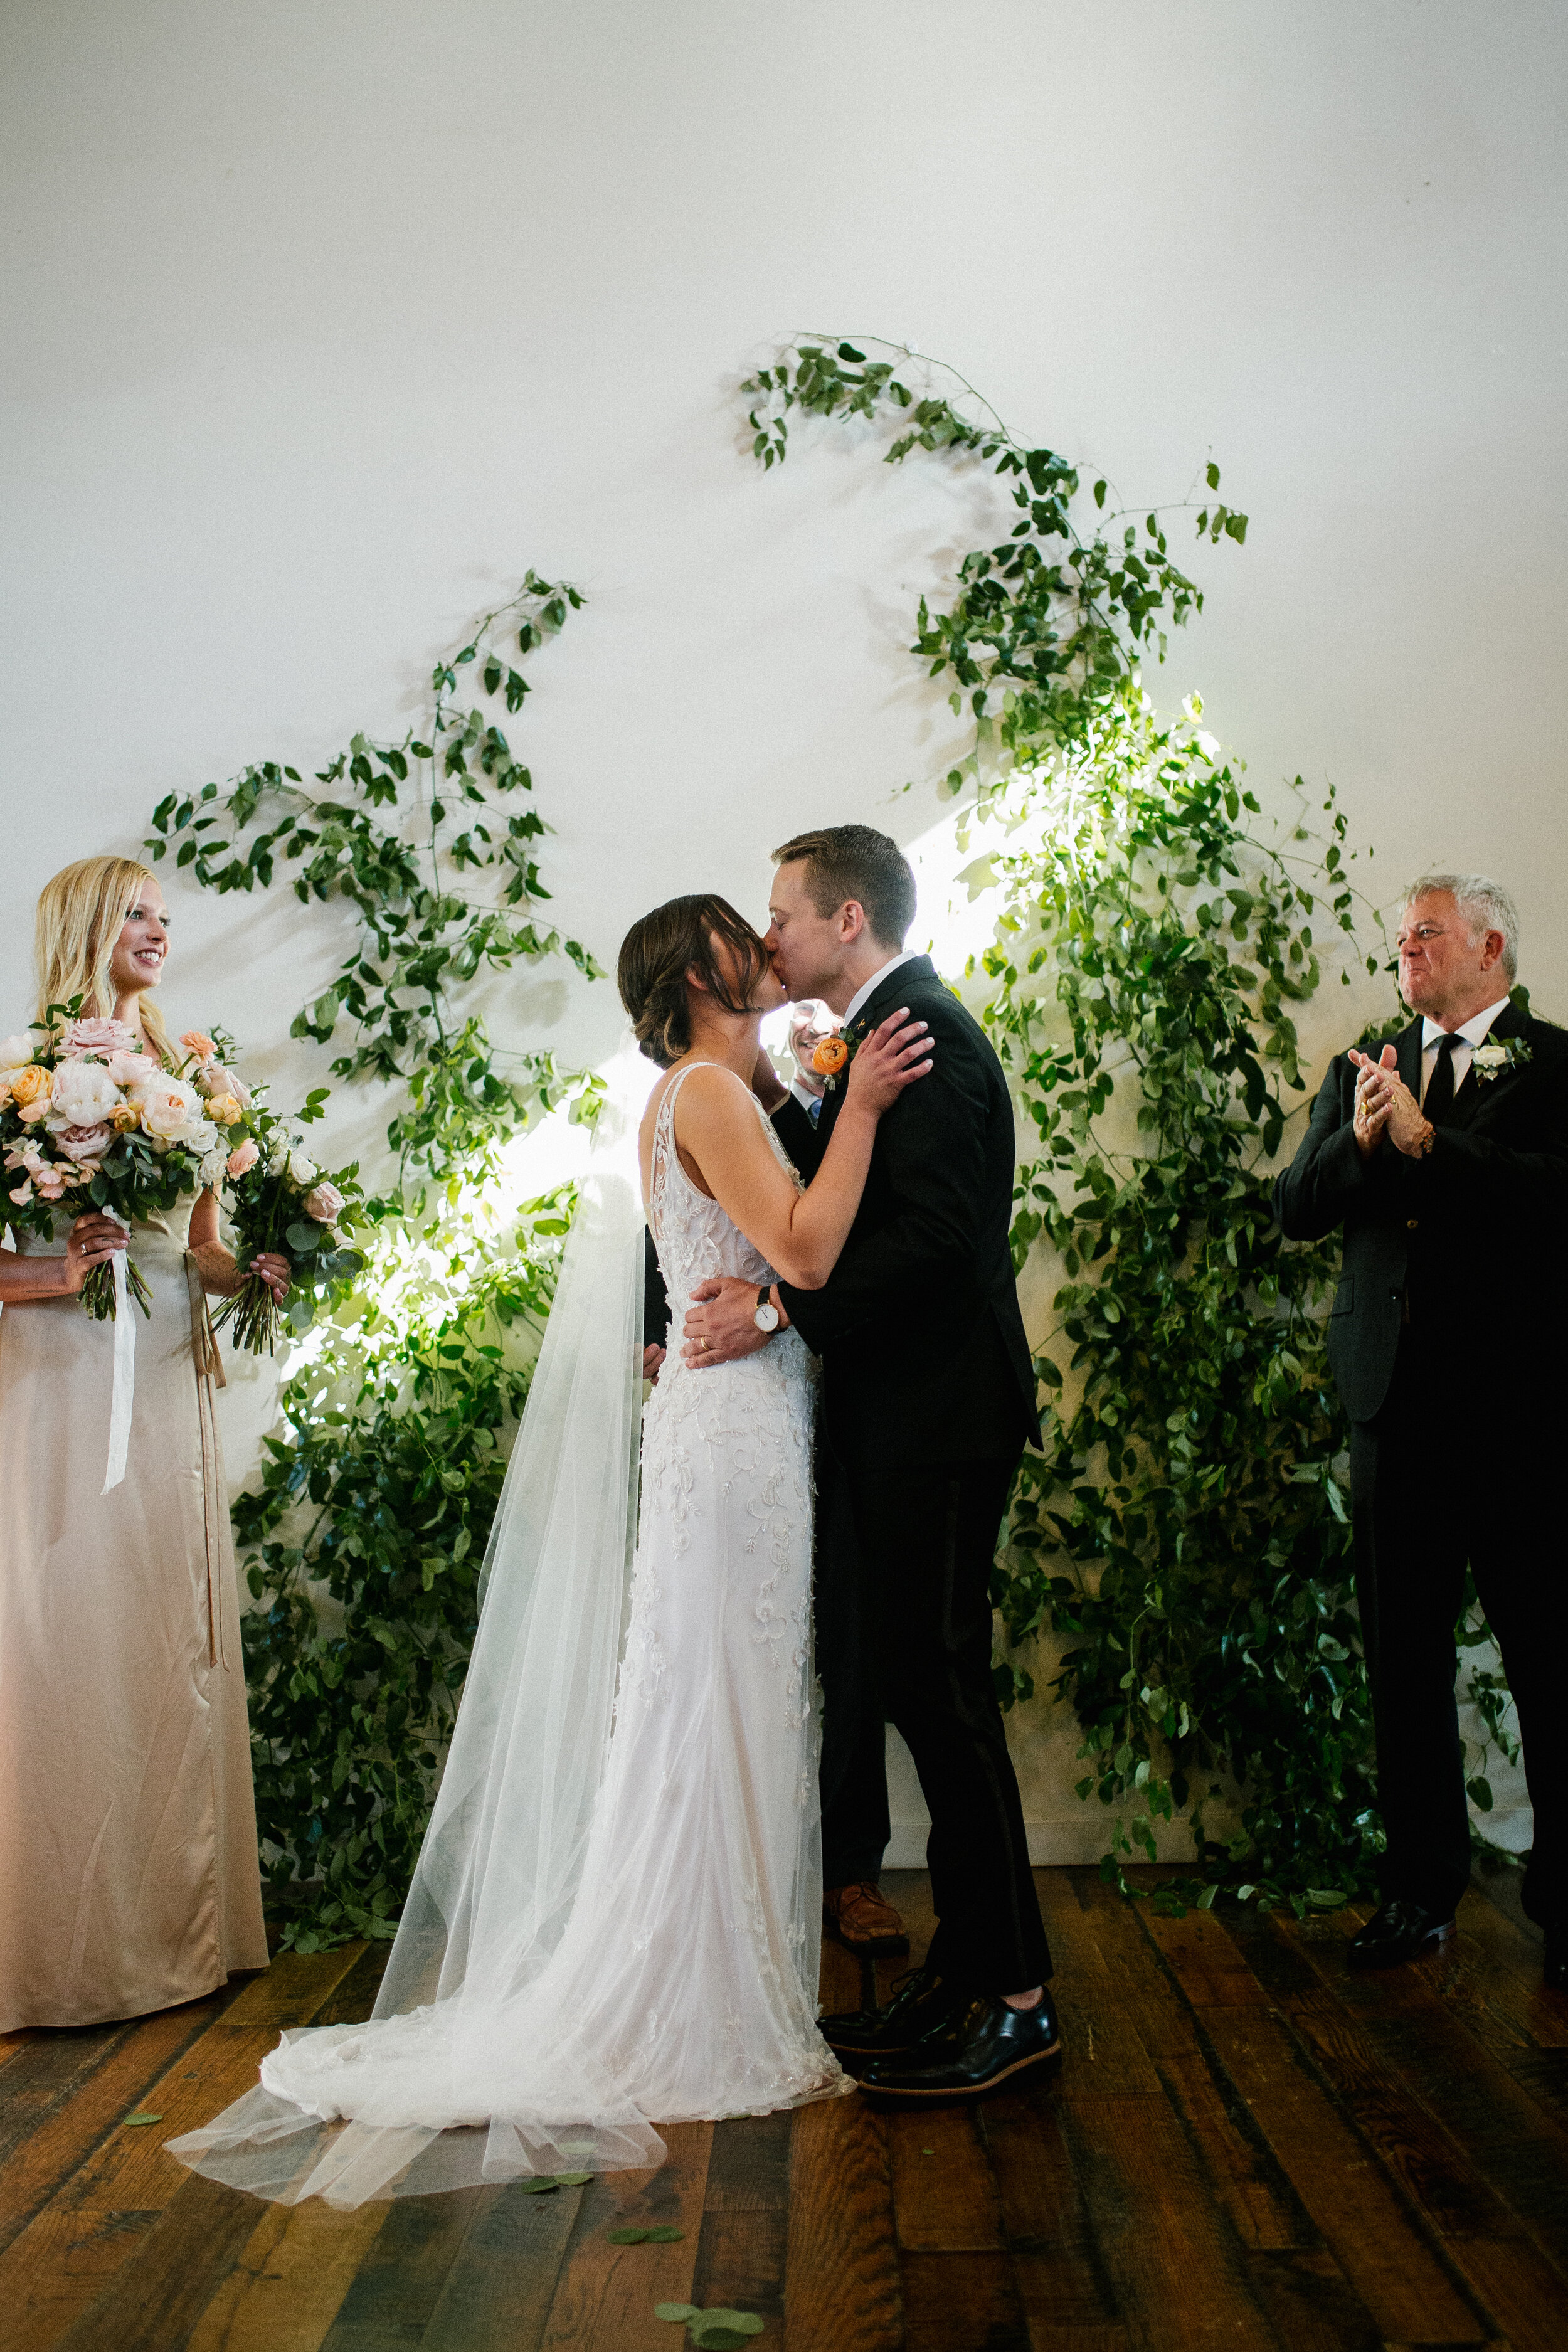 Vine-like greenery installation - creating an arch on the white wall at the Cordelle as the wedding ceremony backdrop. Nashville wedding floral design.